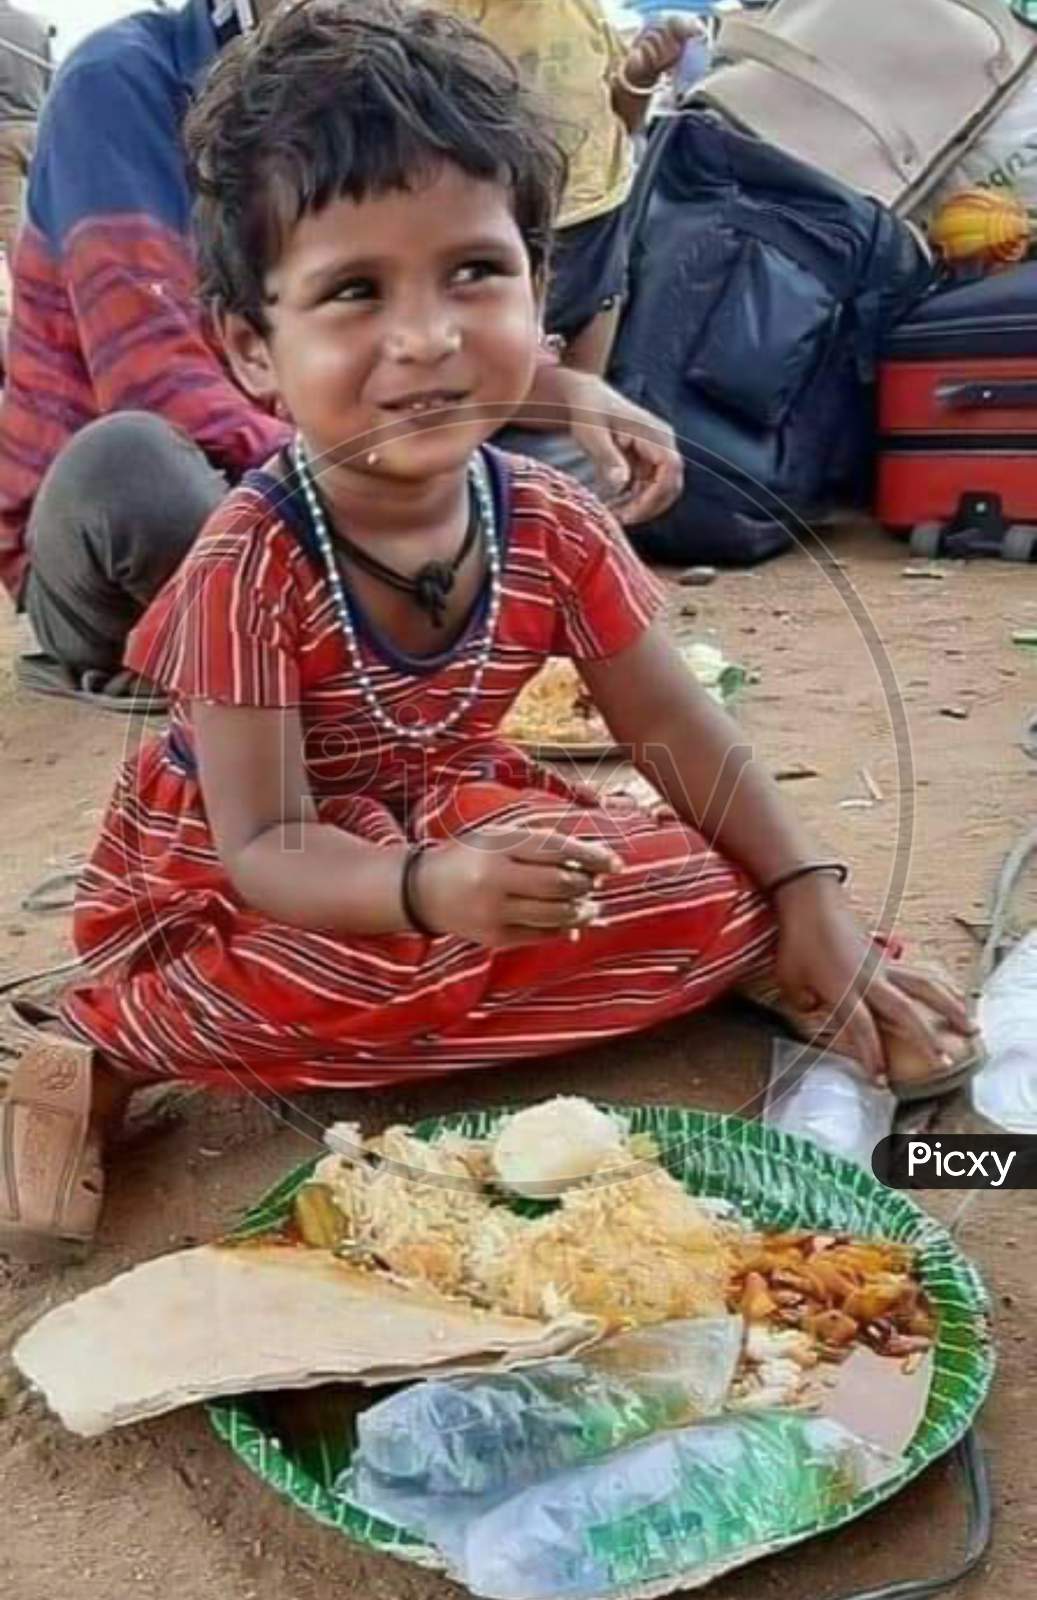 Million dollars smile of a migrant child by getting some foods.